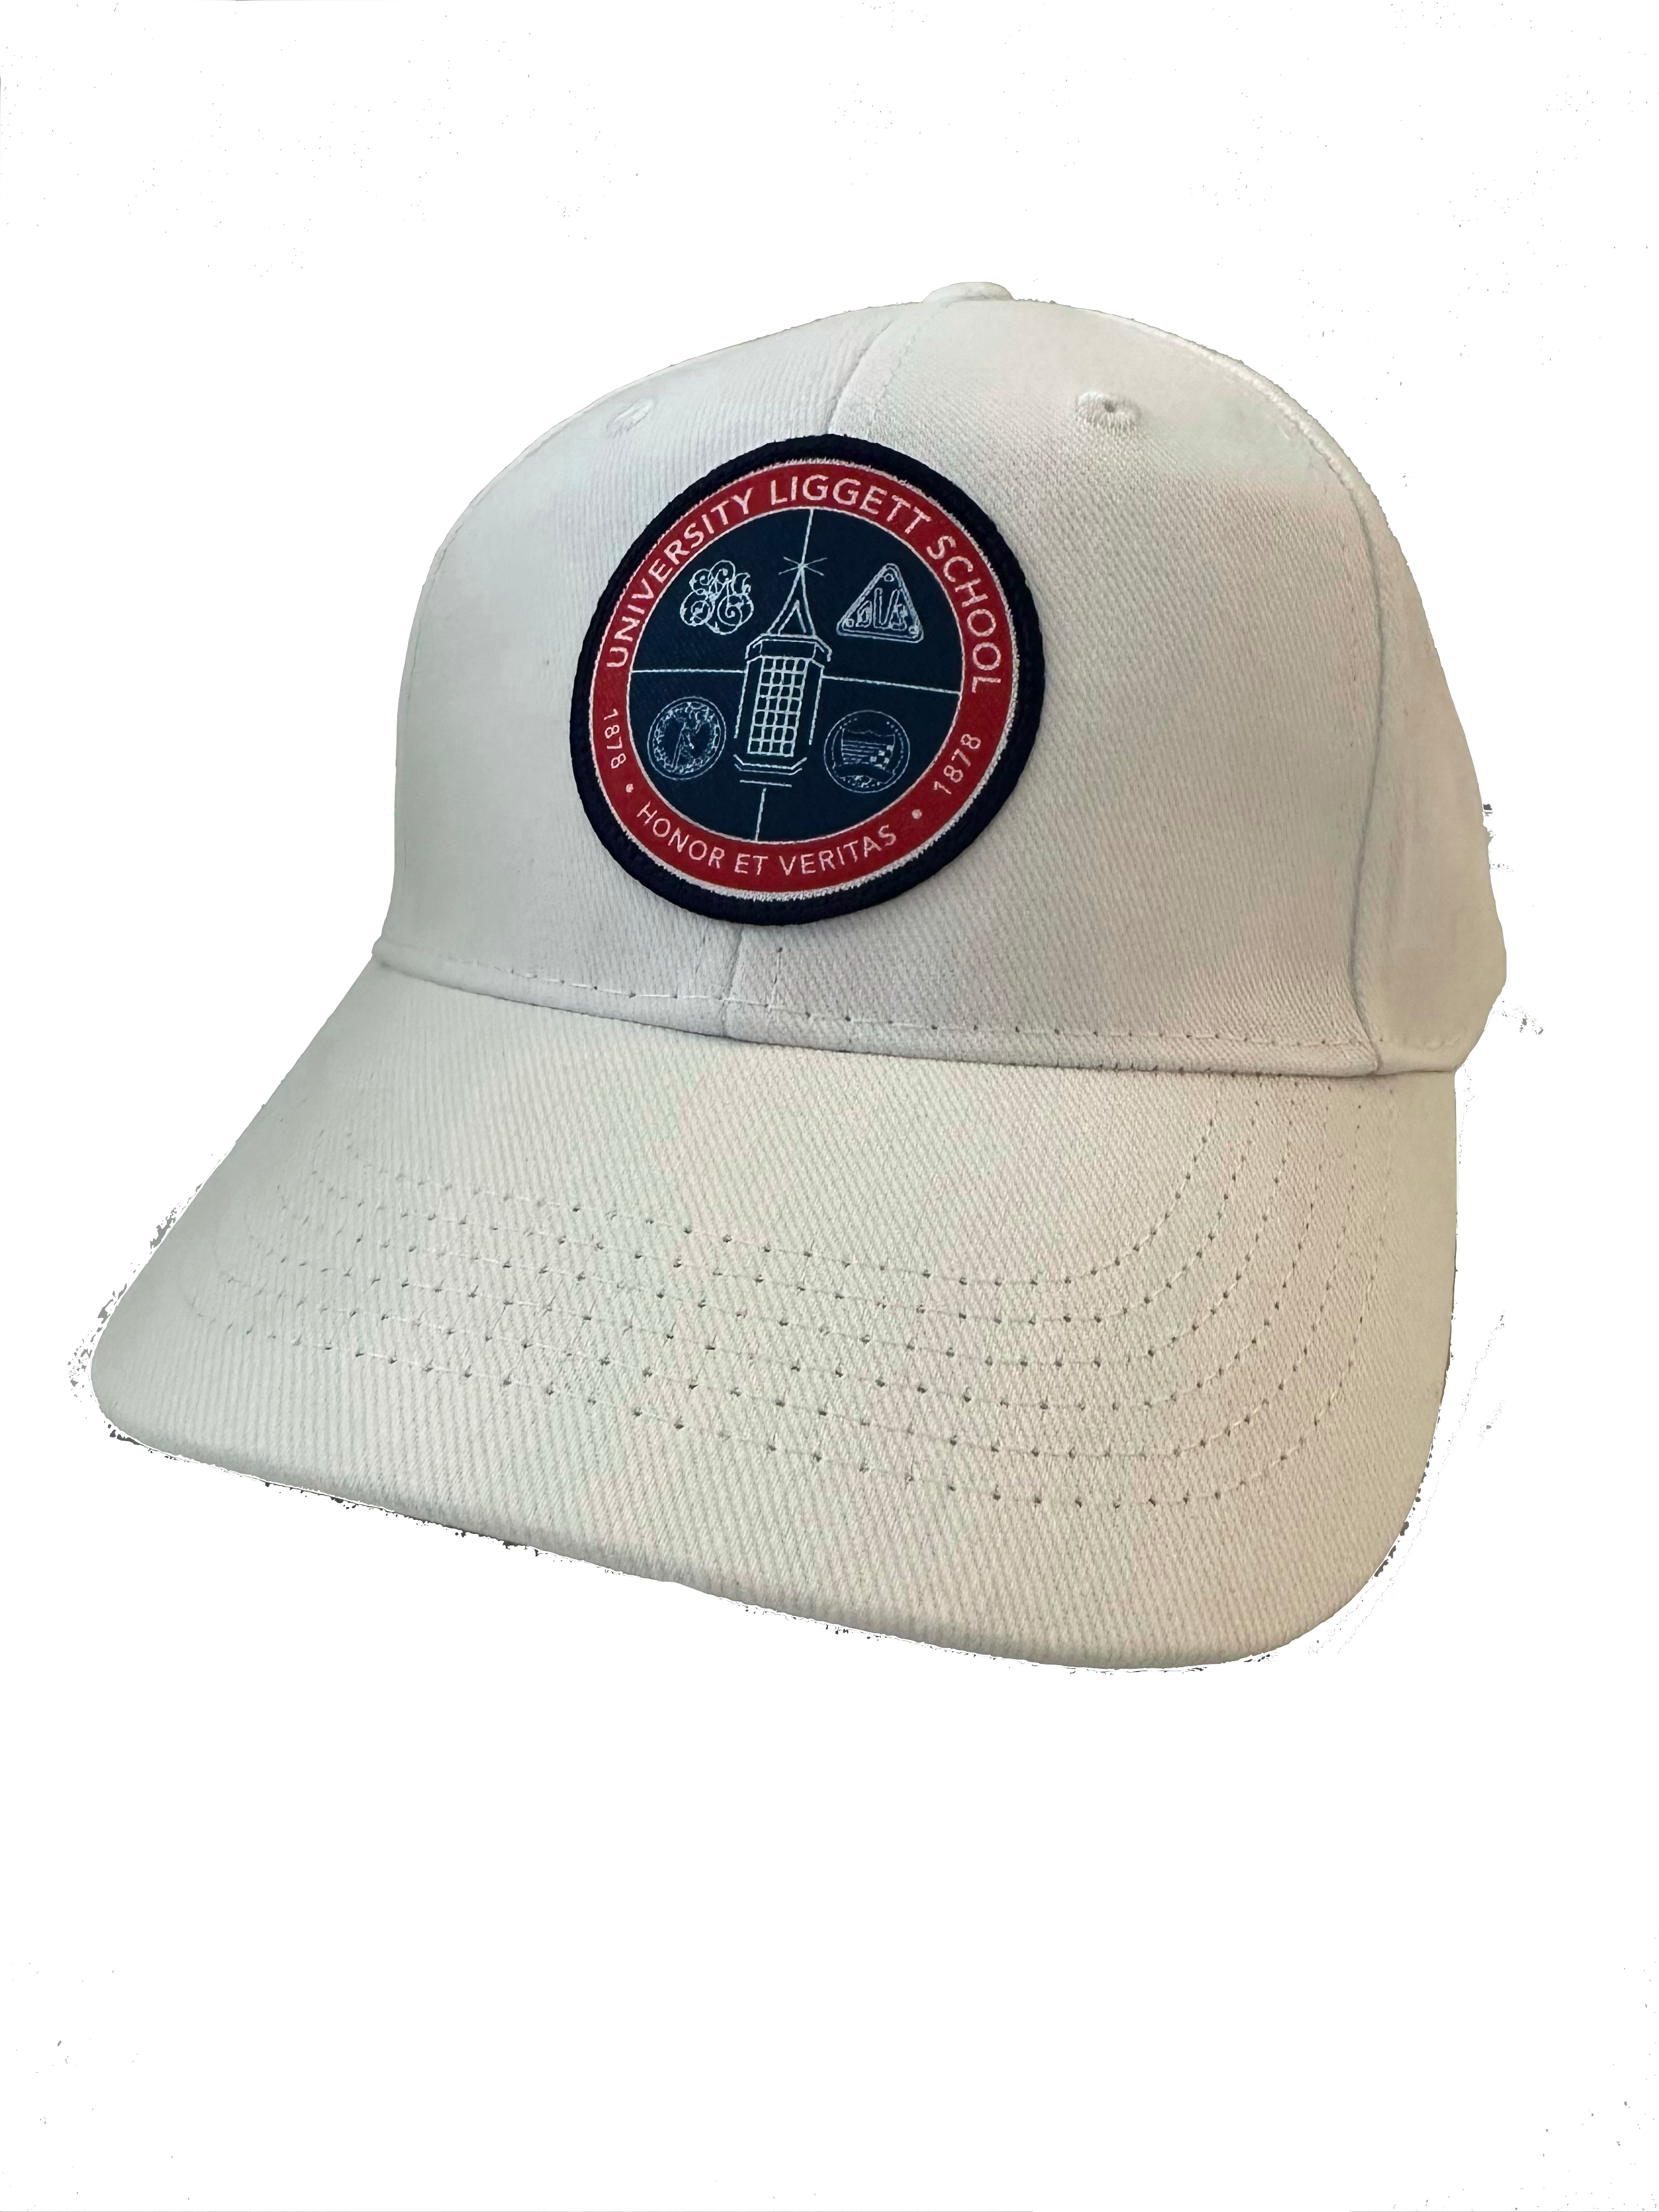 NEW White Brushed Twill Cap with Crest Patch